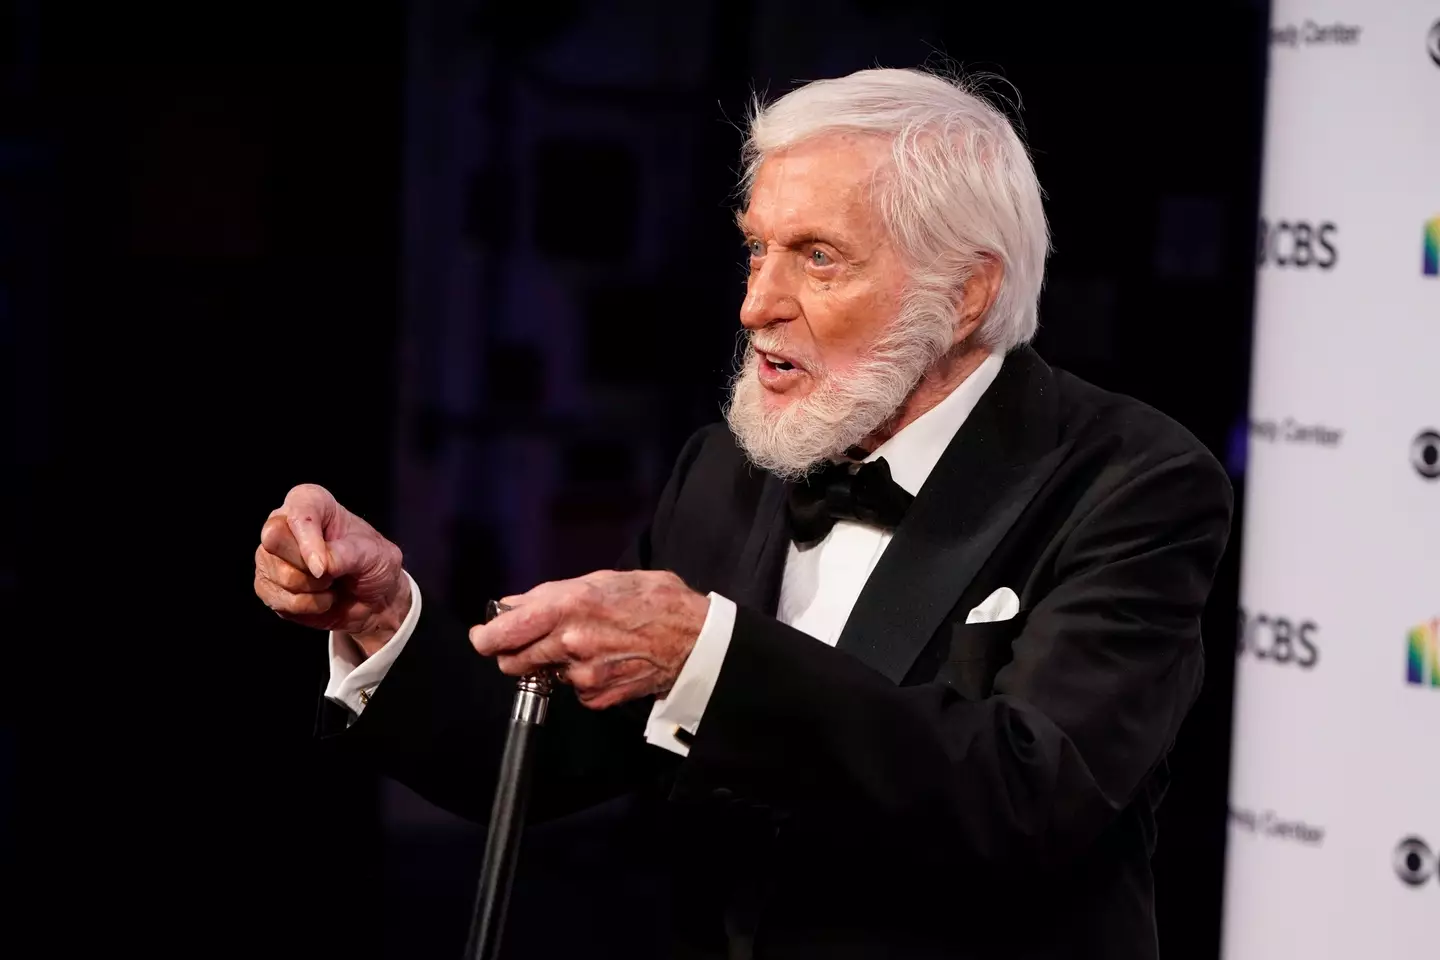 Dick Van Dyke gave a brilliant answer when asked what his secret to a long life was.